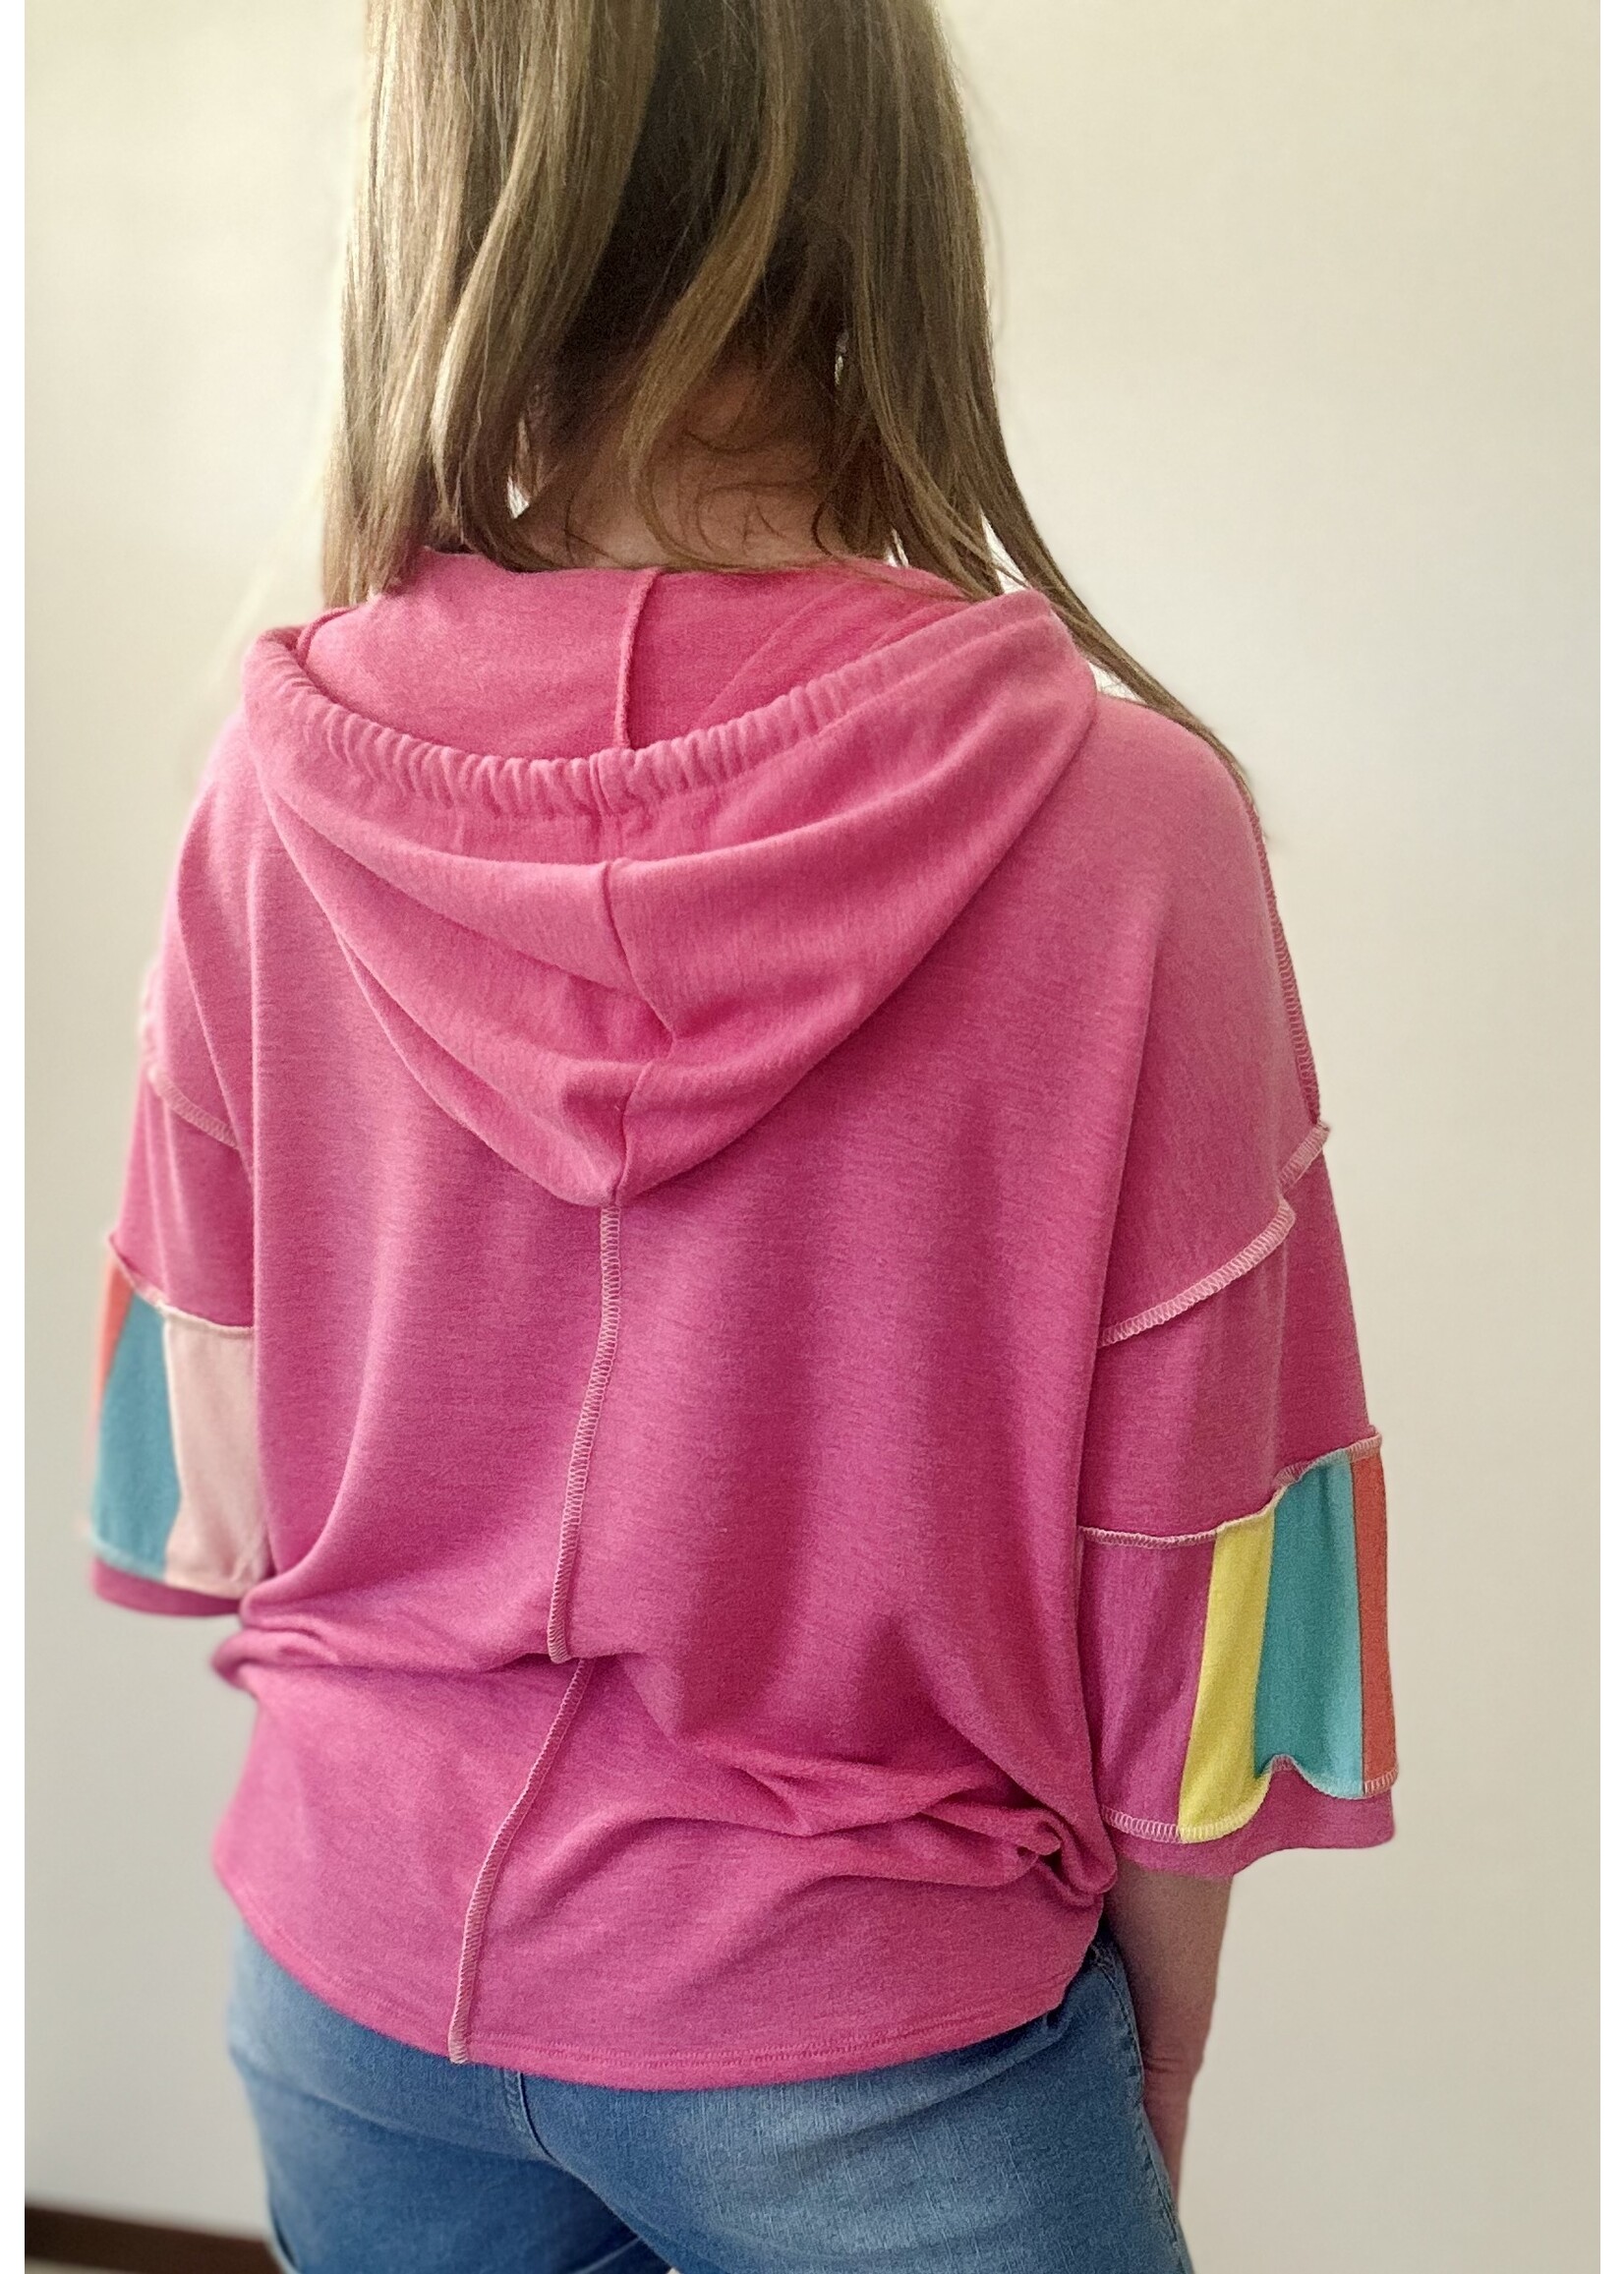 Summer Days Hooded Top